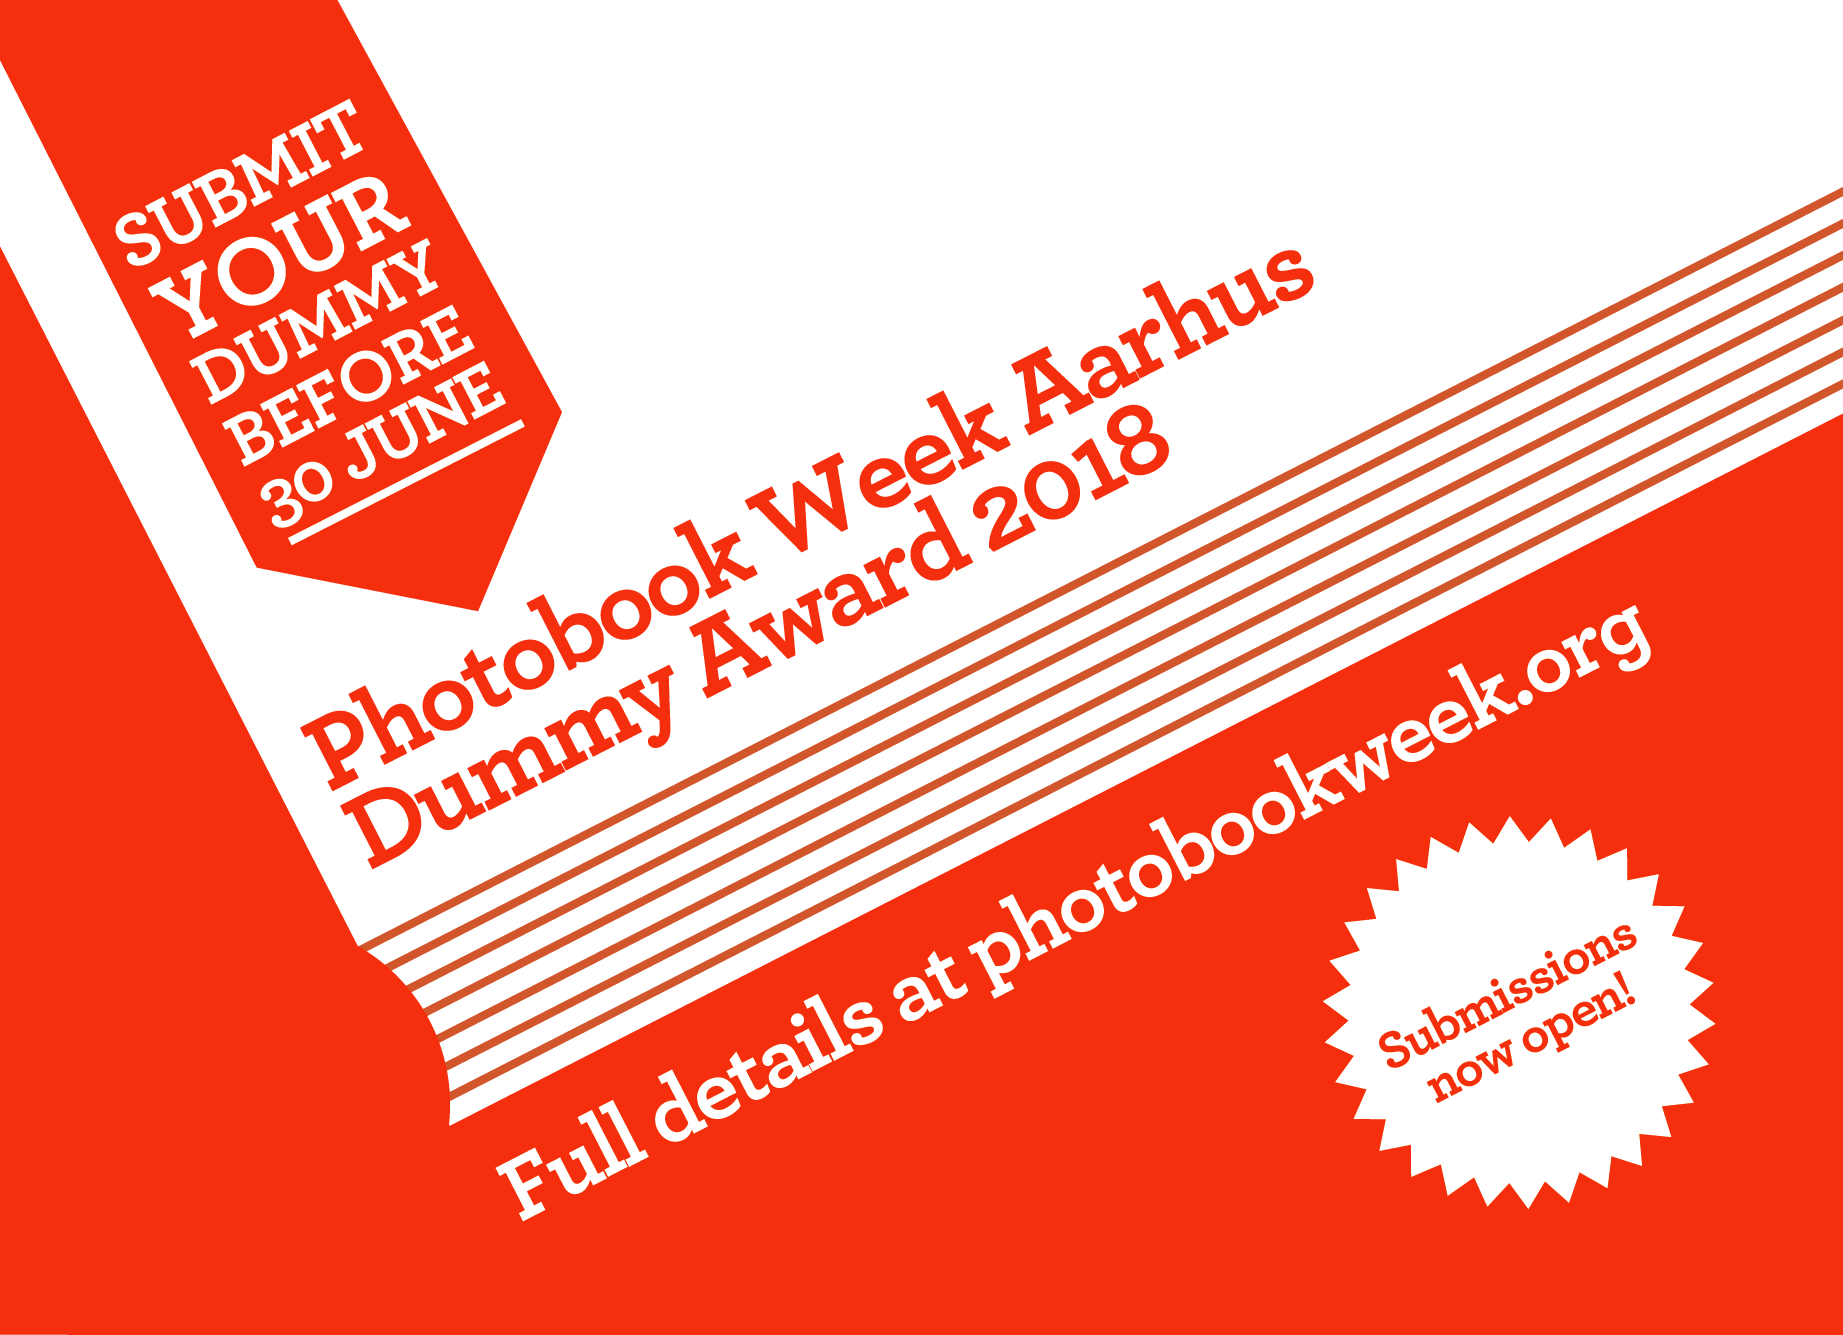 Submit your dummy to the new Photobook Week Aarhus Dummy Award!